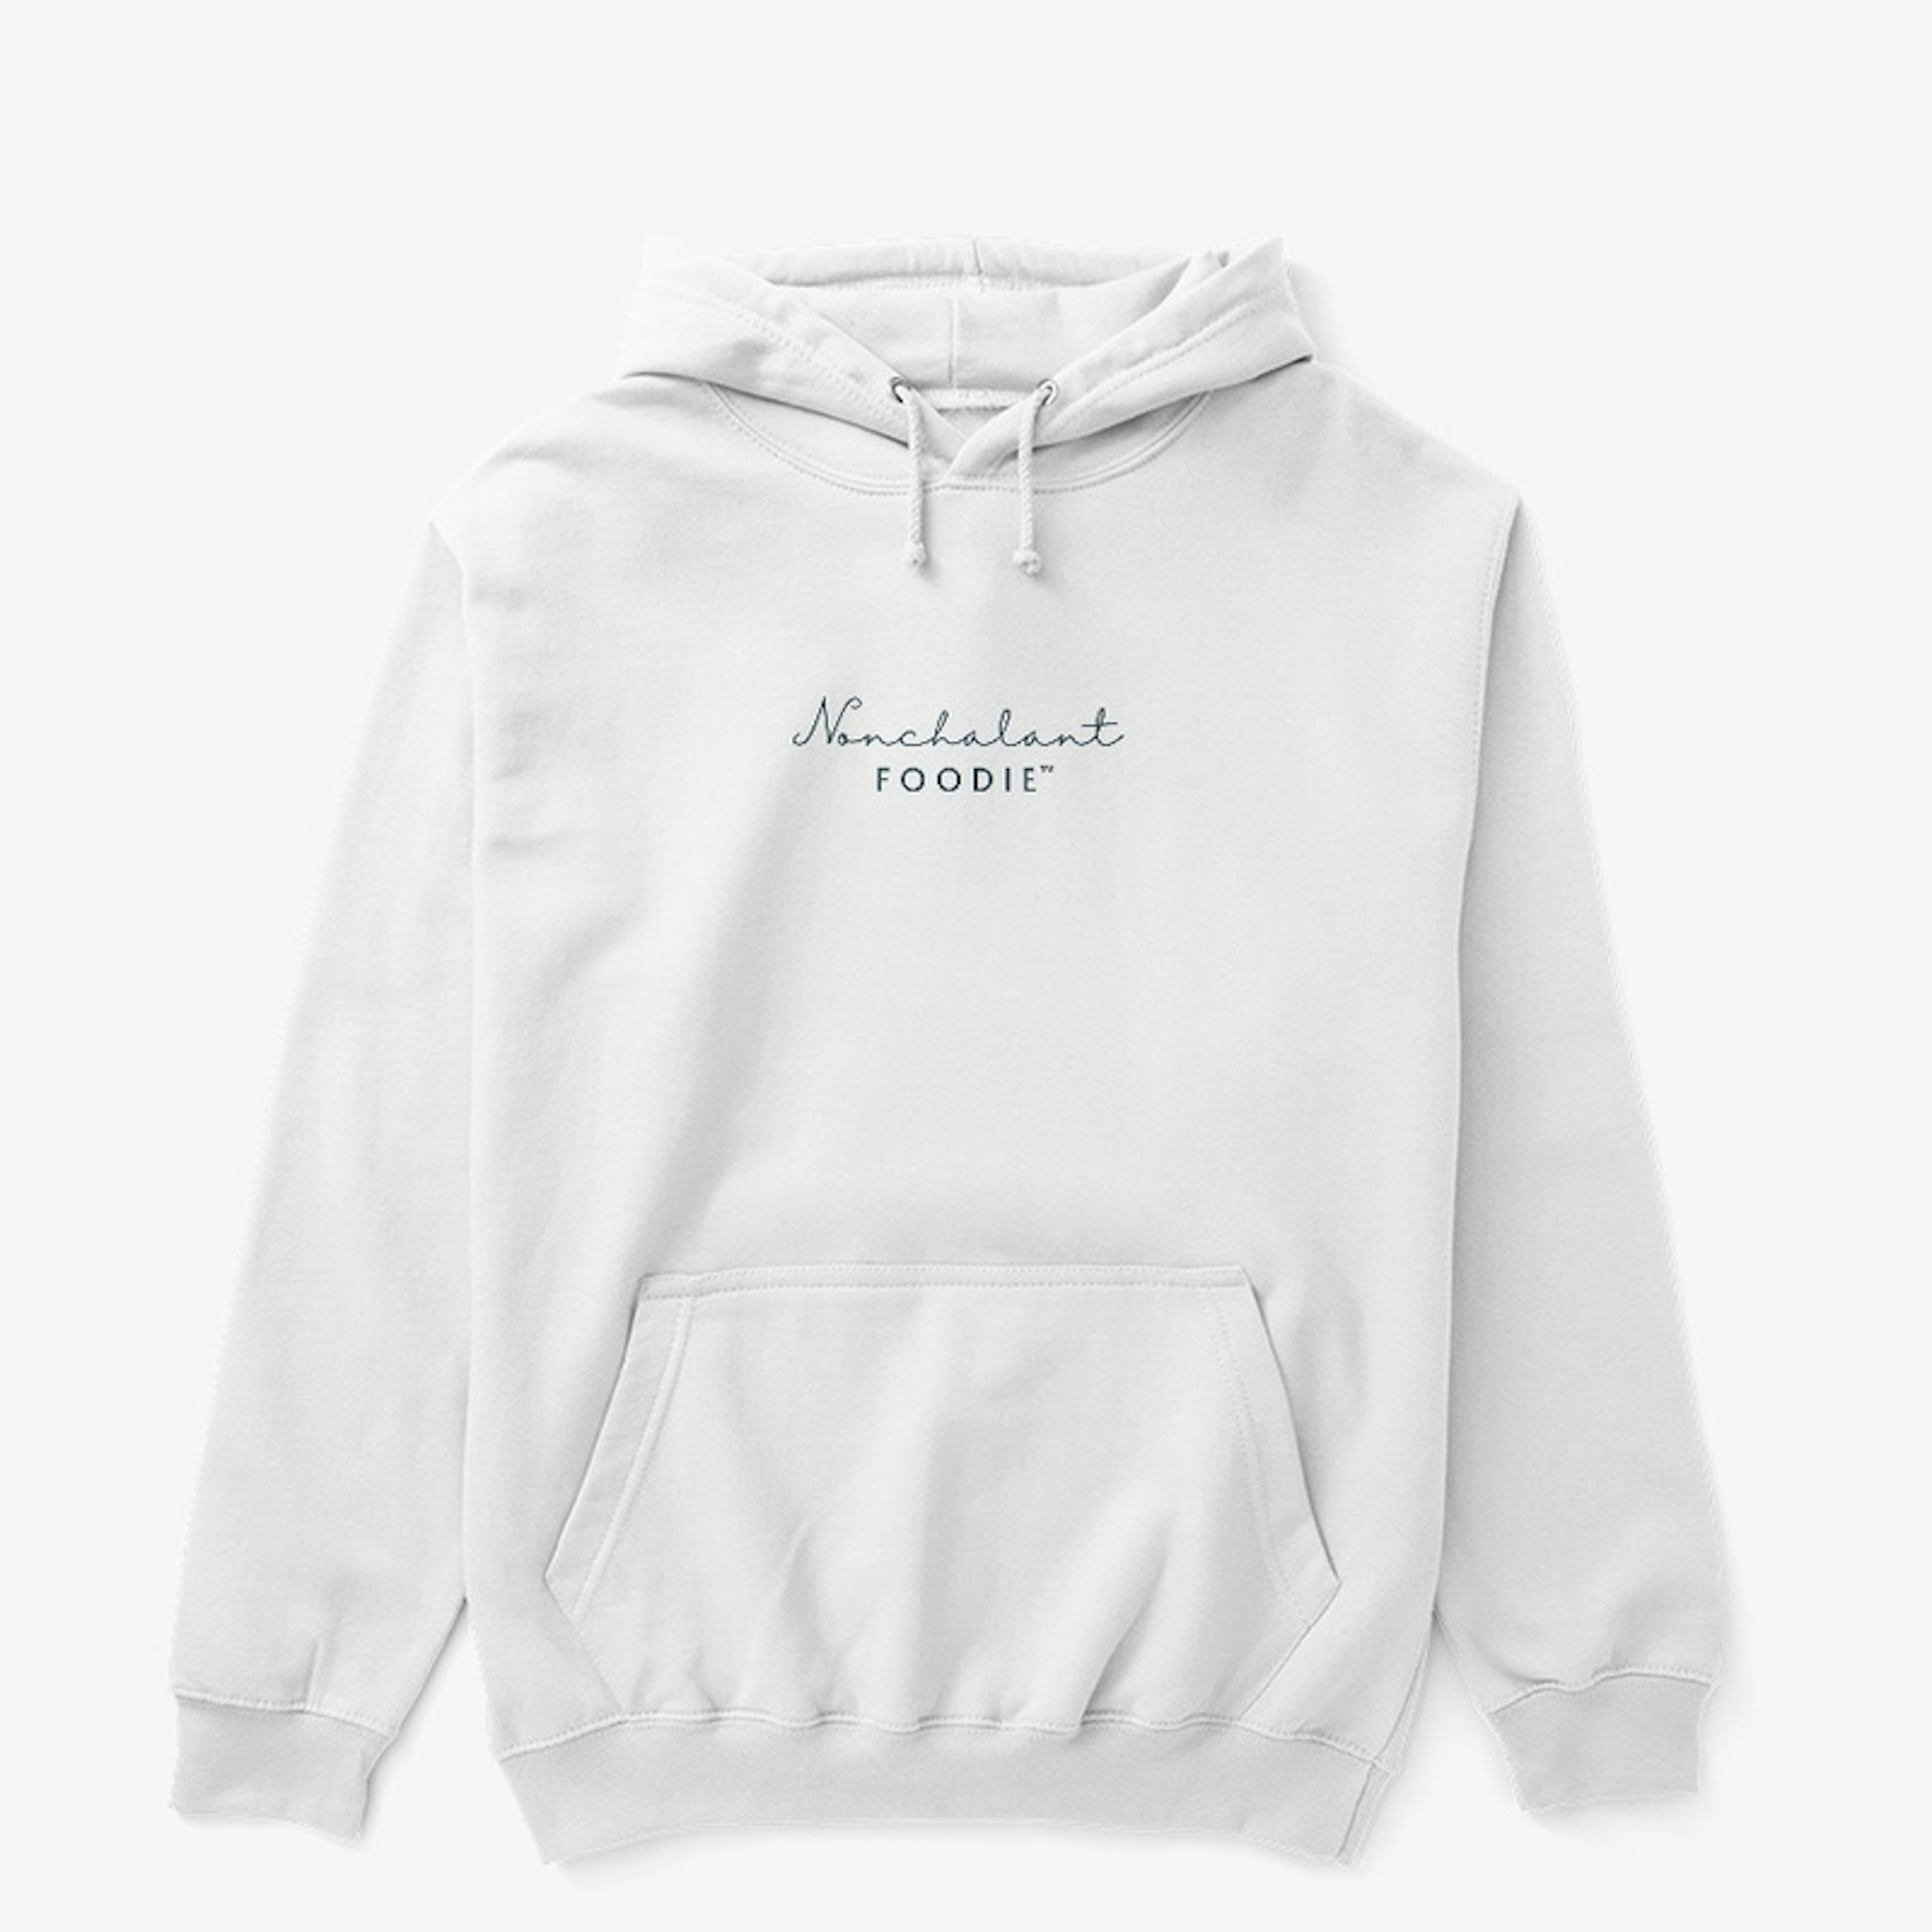 The Nonchalant Foodie Hoodie